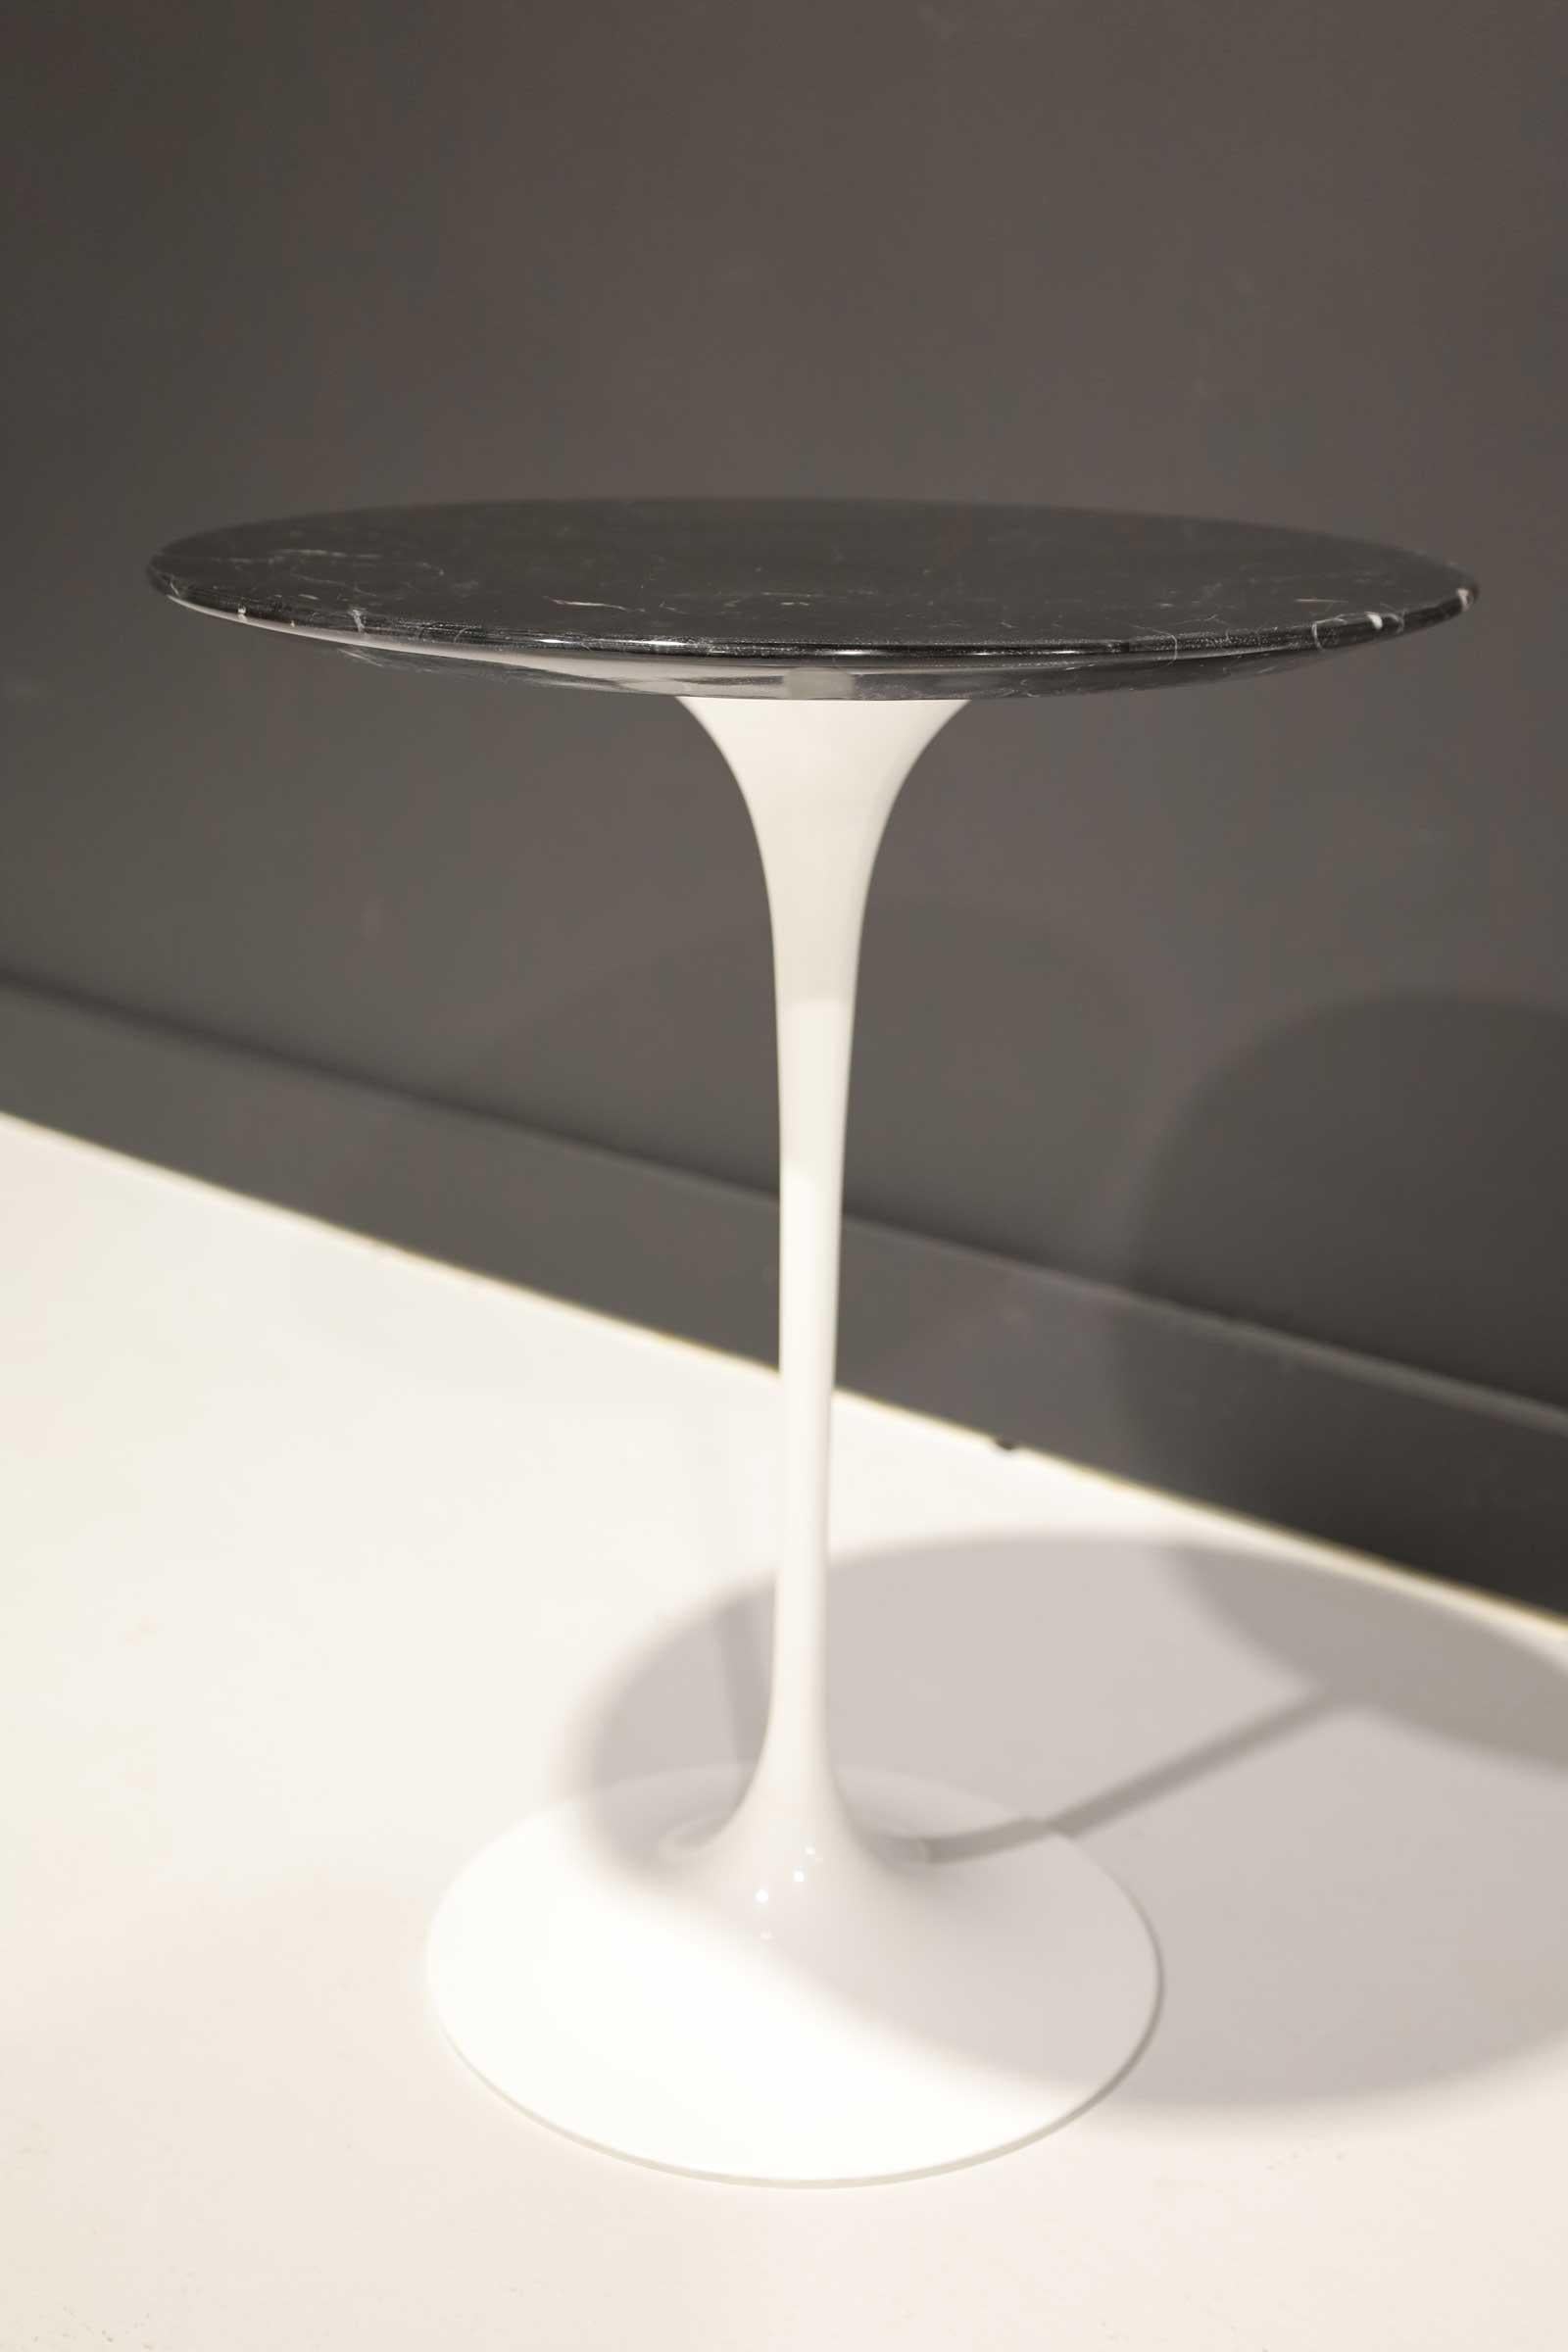 Mid-Century Modern Eero Saarinen for Knoll Knoll Tulip Table with Black Marble Top and White Base